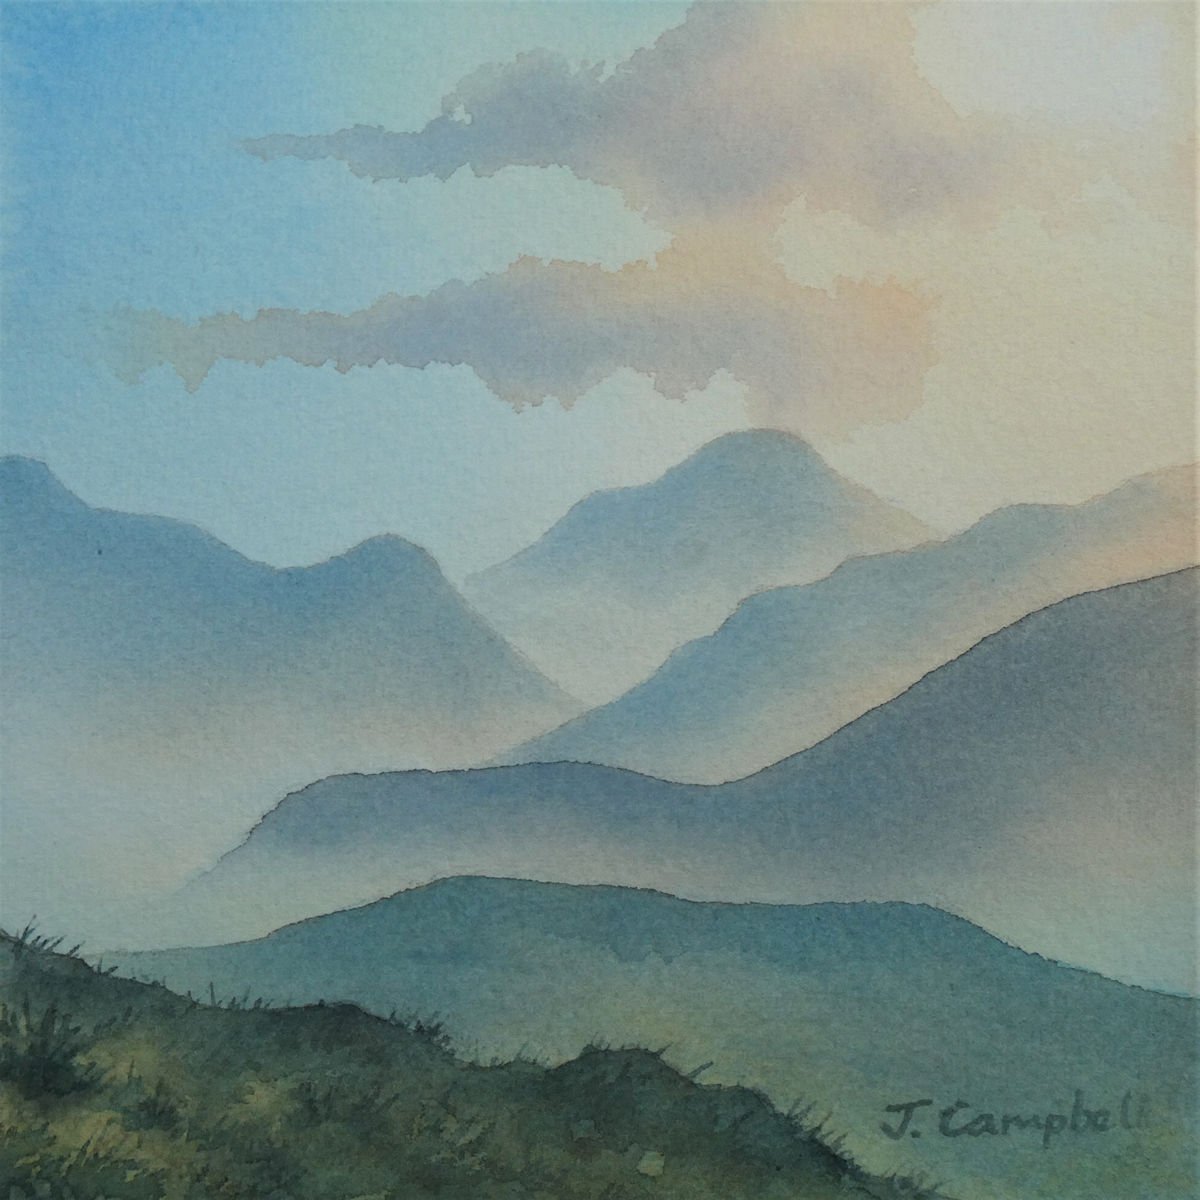 View across Catbells by John Campbell